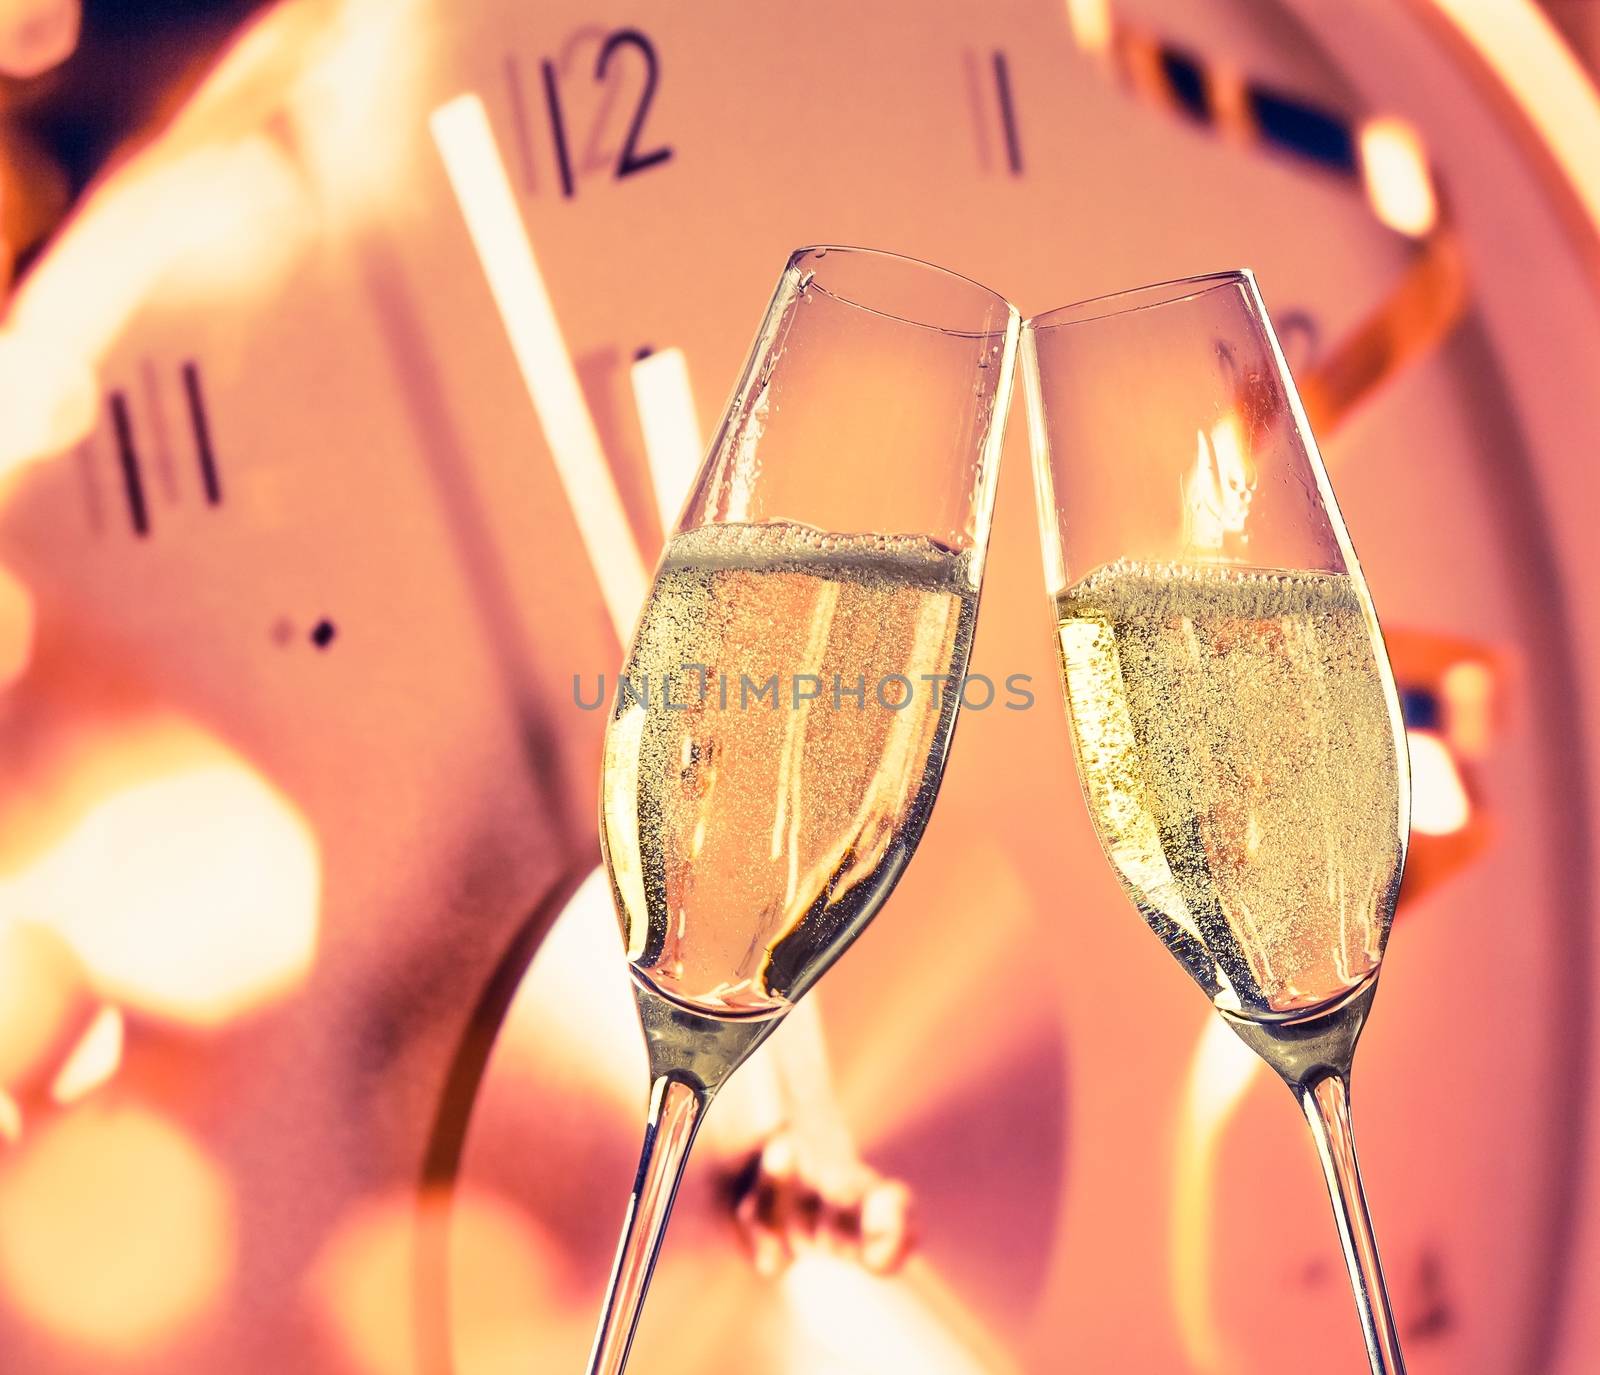 New Year or Christmas at midnight with champagne flutes make cheers on clock background by donfiore